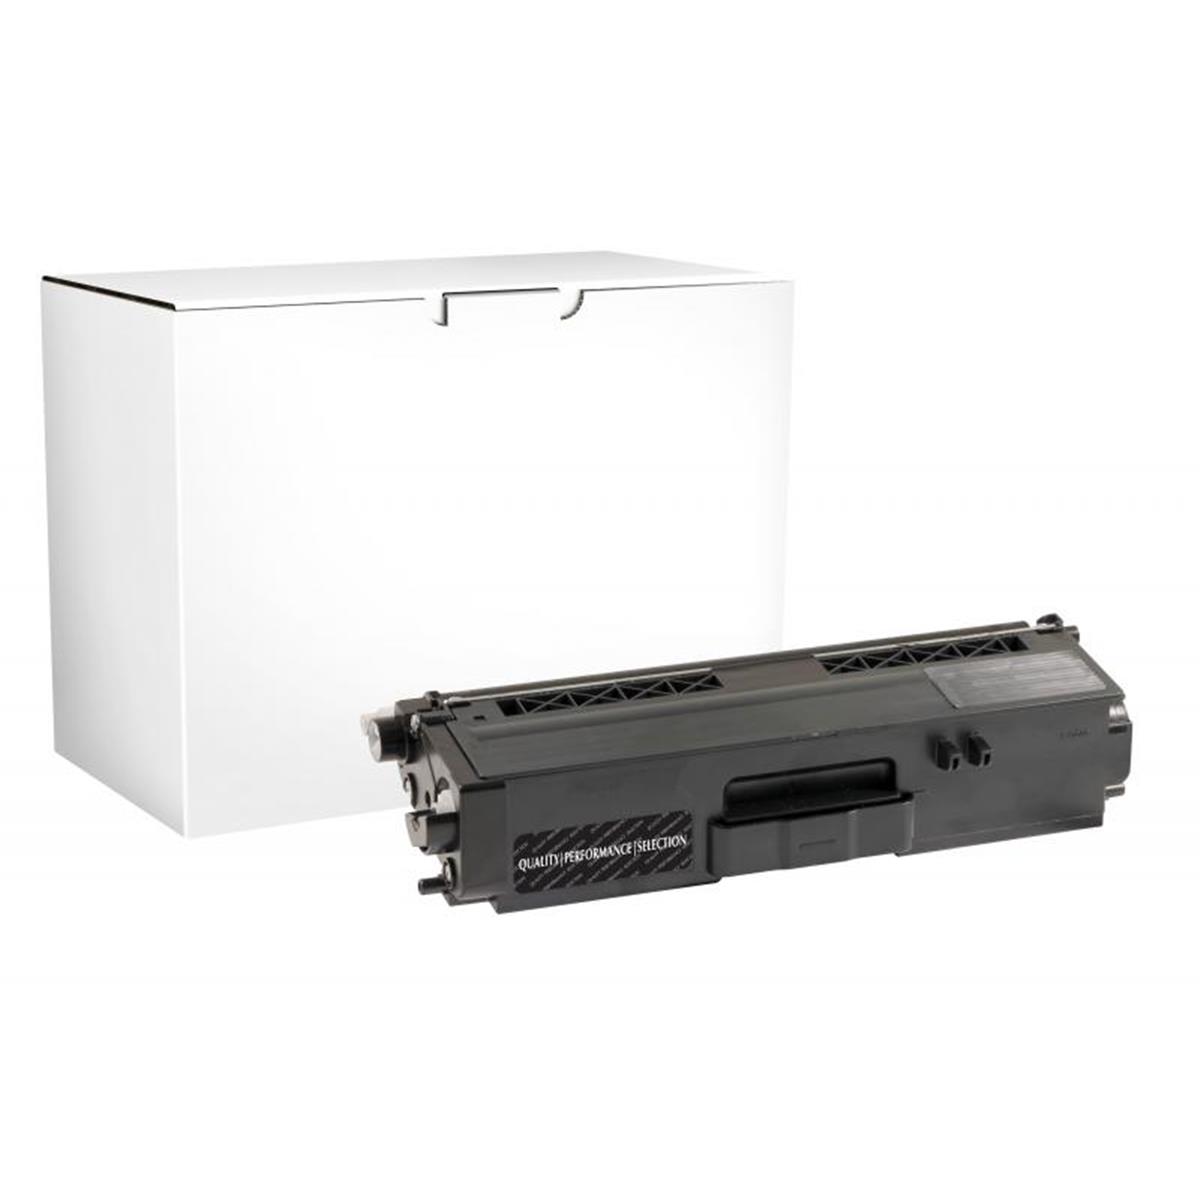 Picture of Brother 200910 High Yield Black Toner Cartridge for TN336